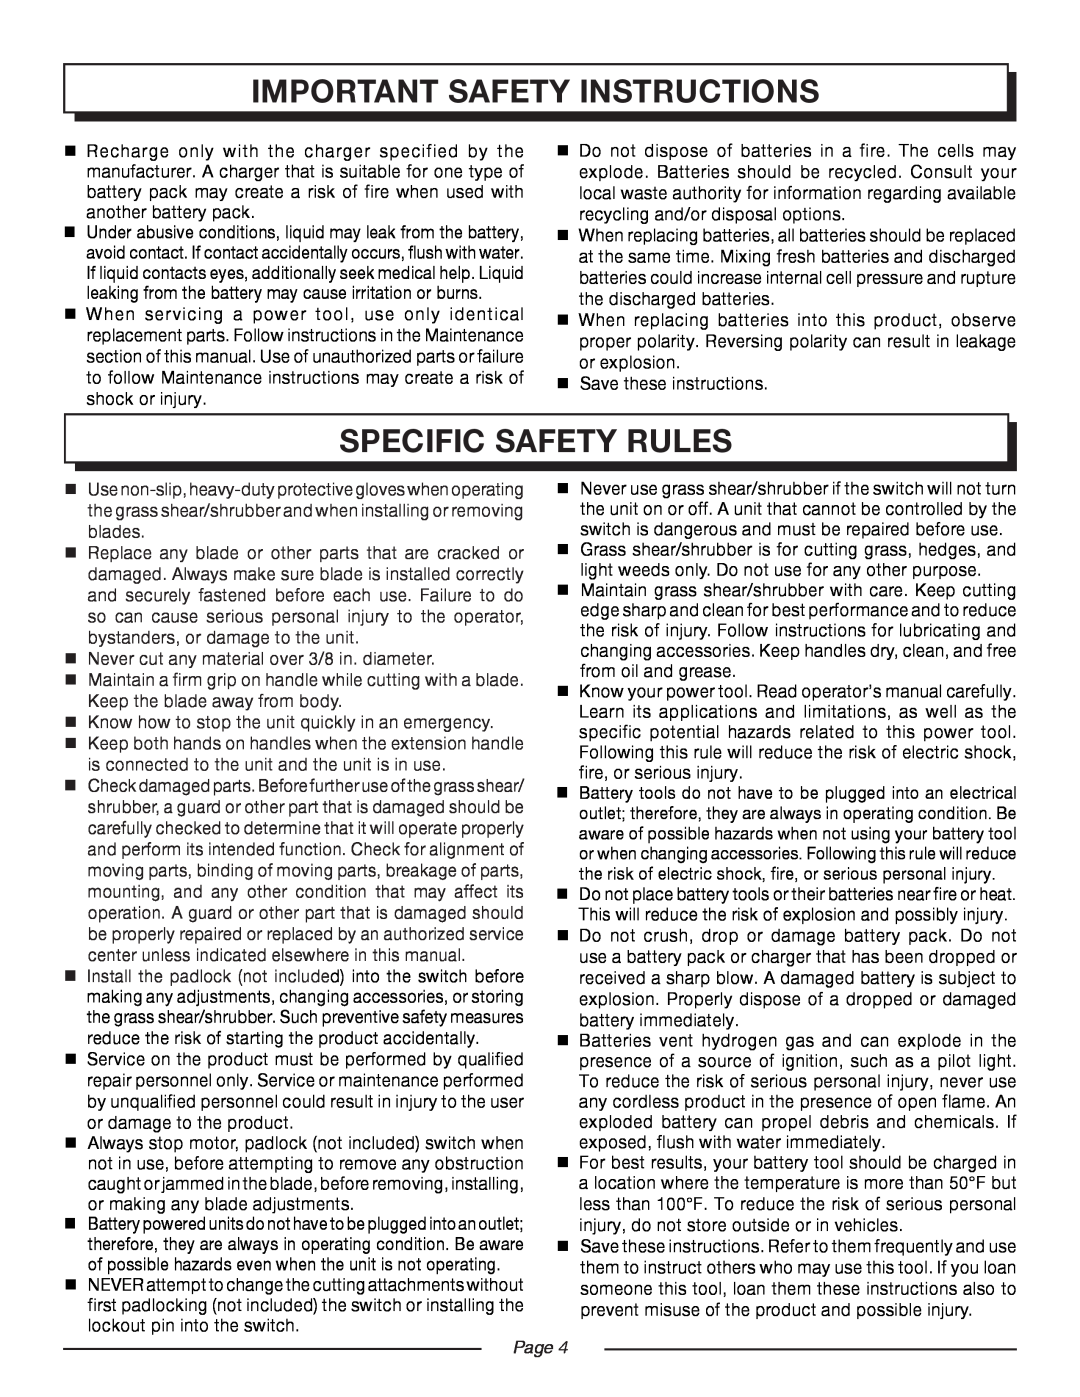 Homelite UT44170 manual Specific Safety Rules, important safety instructions,  Save these instructions, Page  